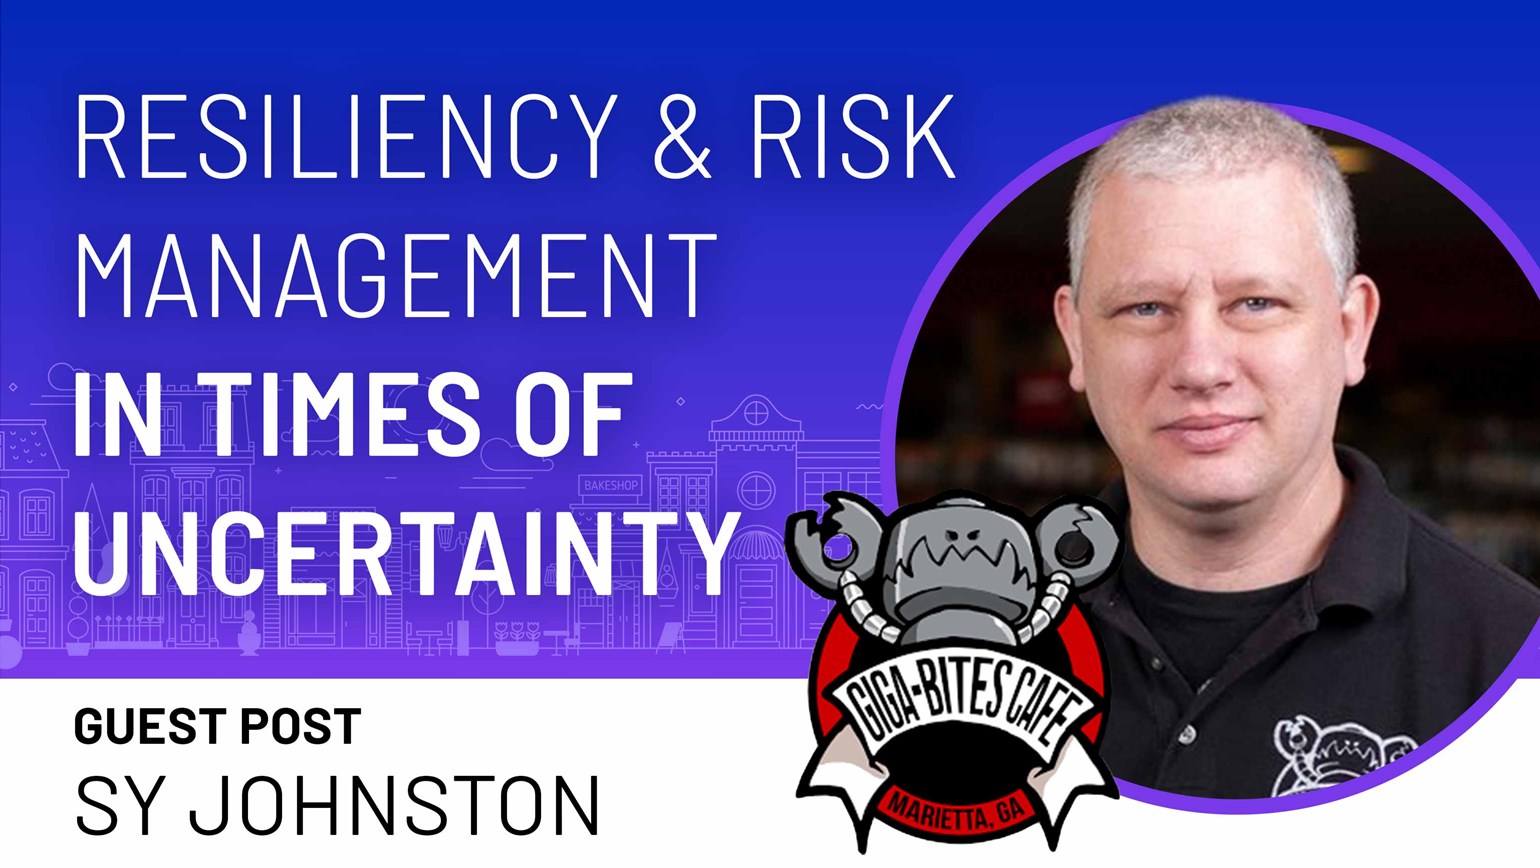 Resiliency & Risk Management In Times of Uncertainty